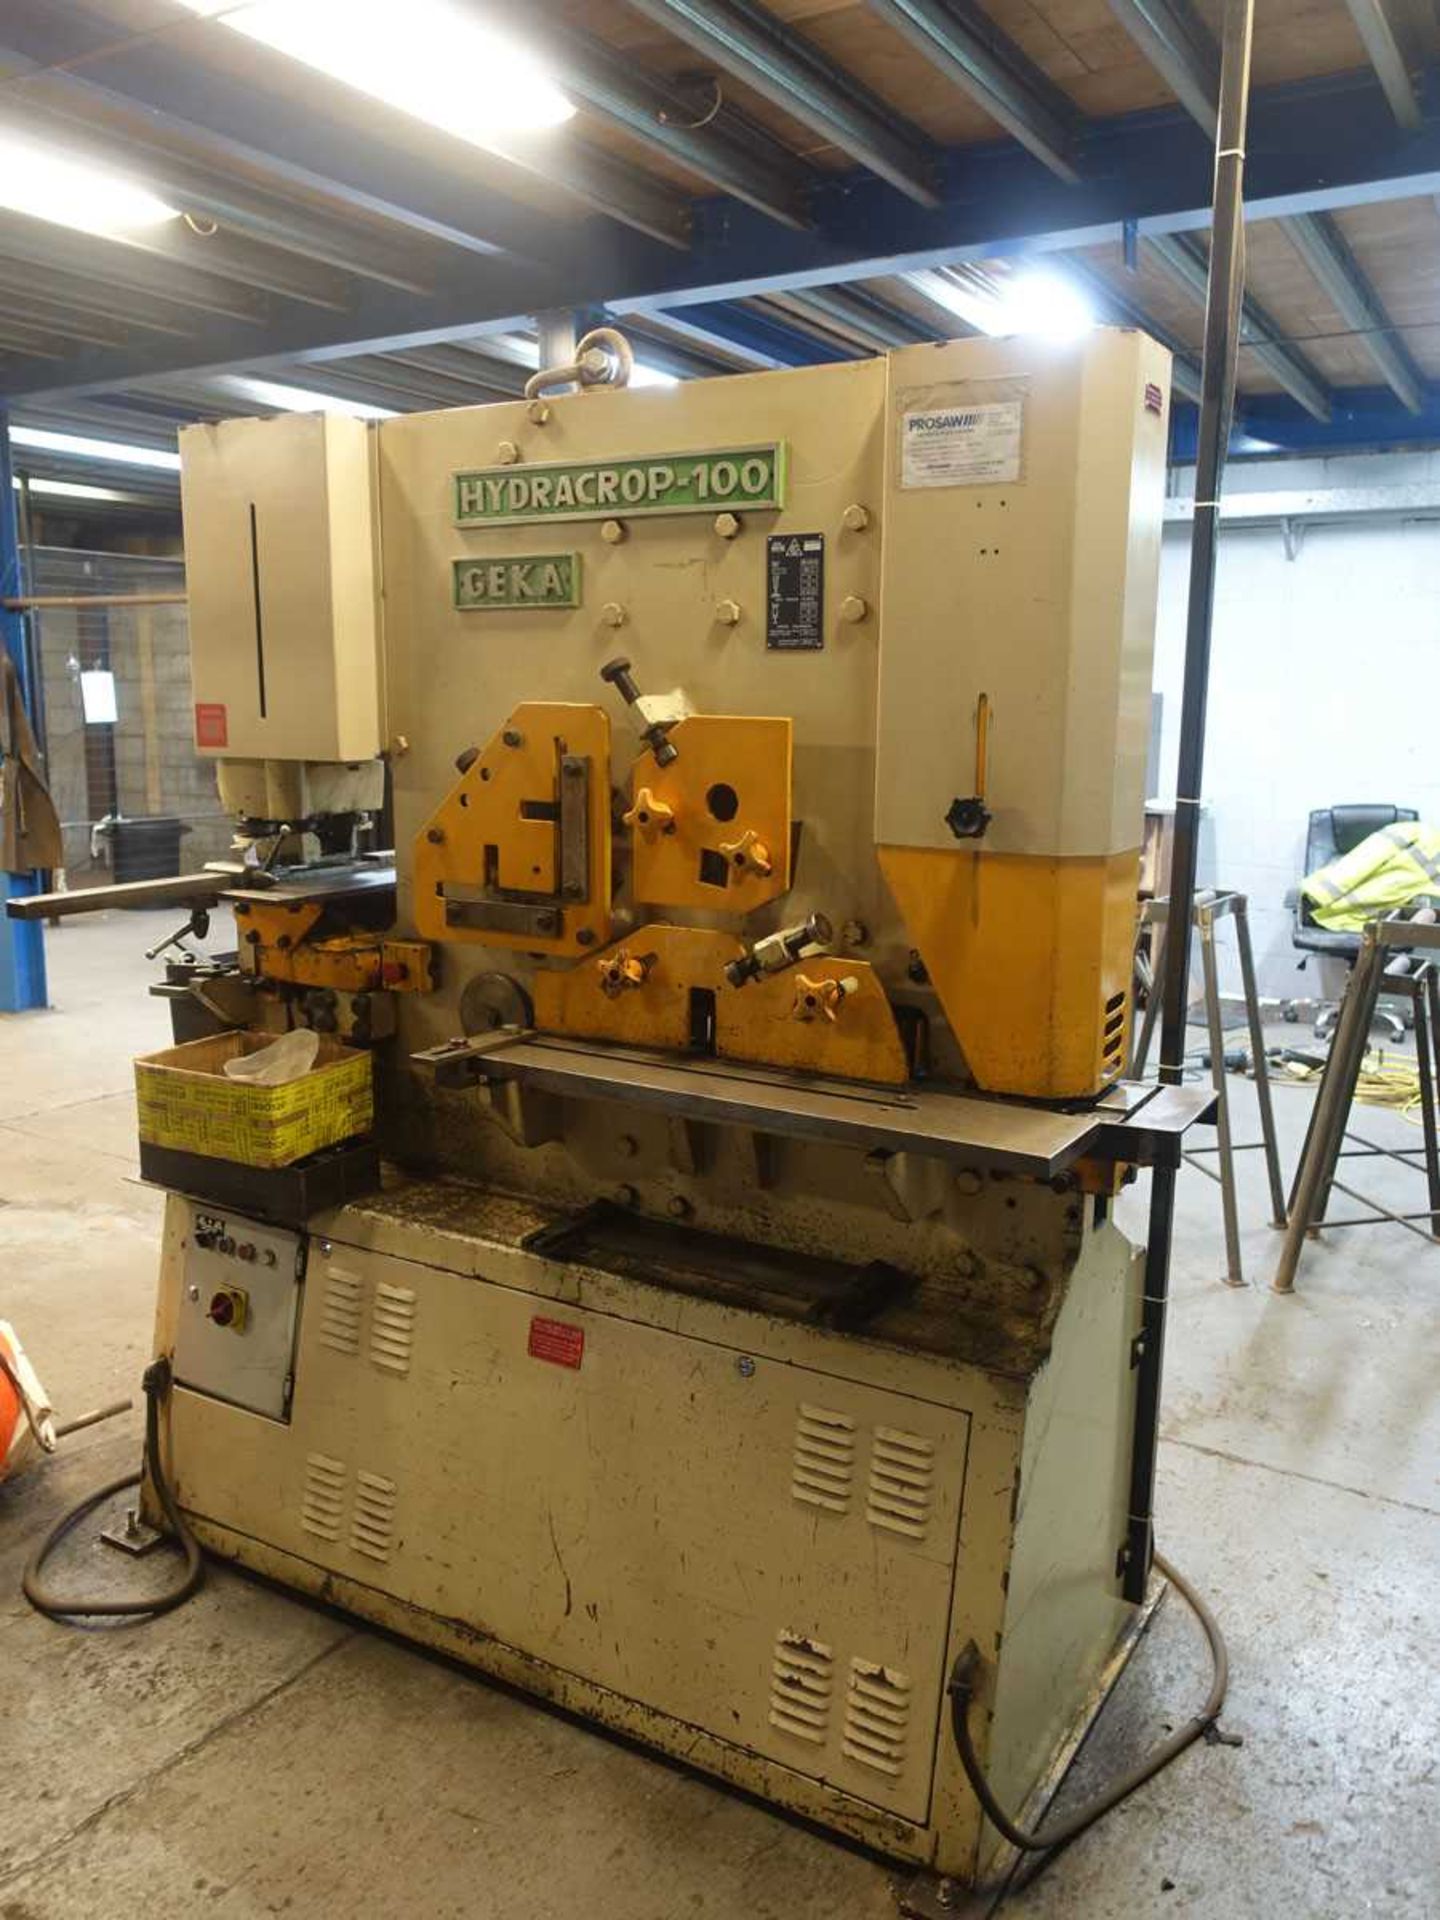 +VAT Geka Hydracrop model HYD-100 metalworker with some tooling Machine no: 13927